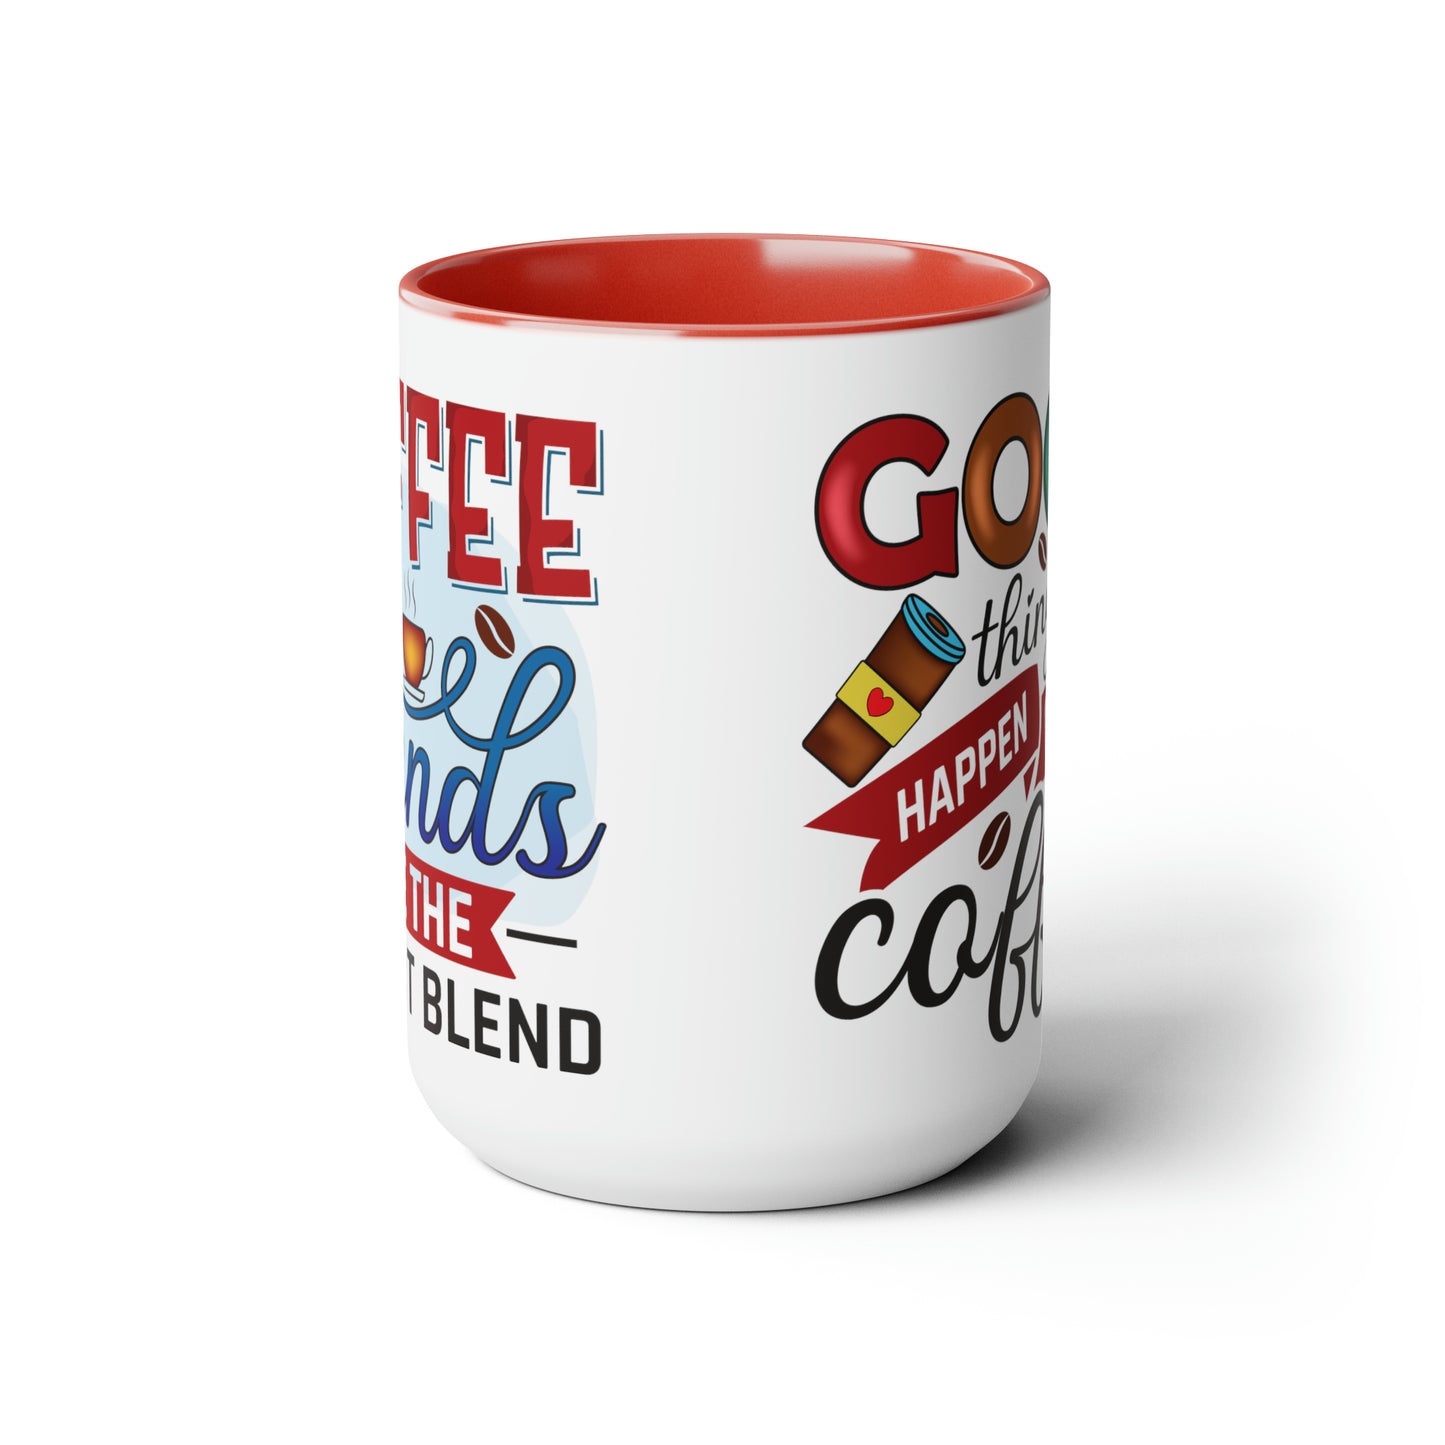 Coffee and Friends Are The Perfect Blend Two-Tone Coffee Mugs, 15oz, Coffee Mug, Coffee Cup, Drink Mug, Gifts For Friends, Friend Gift